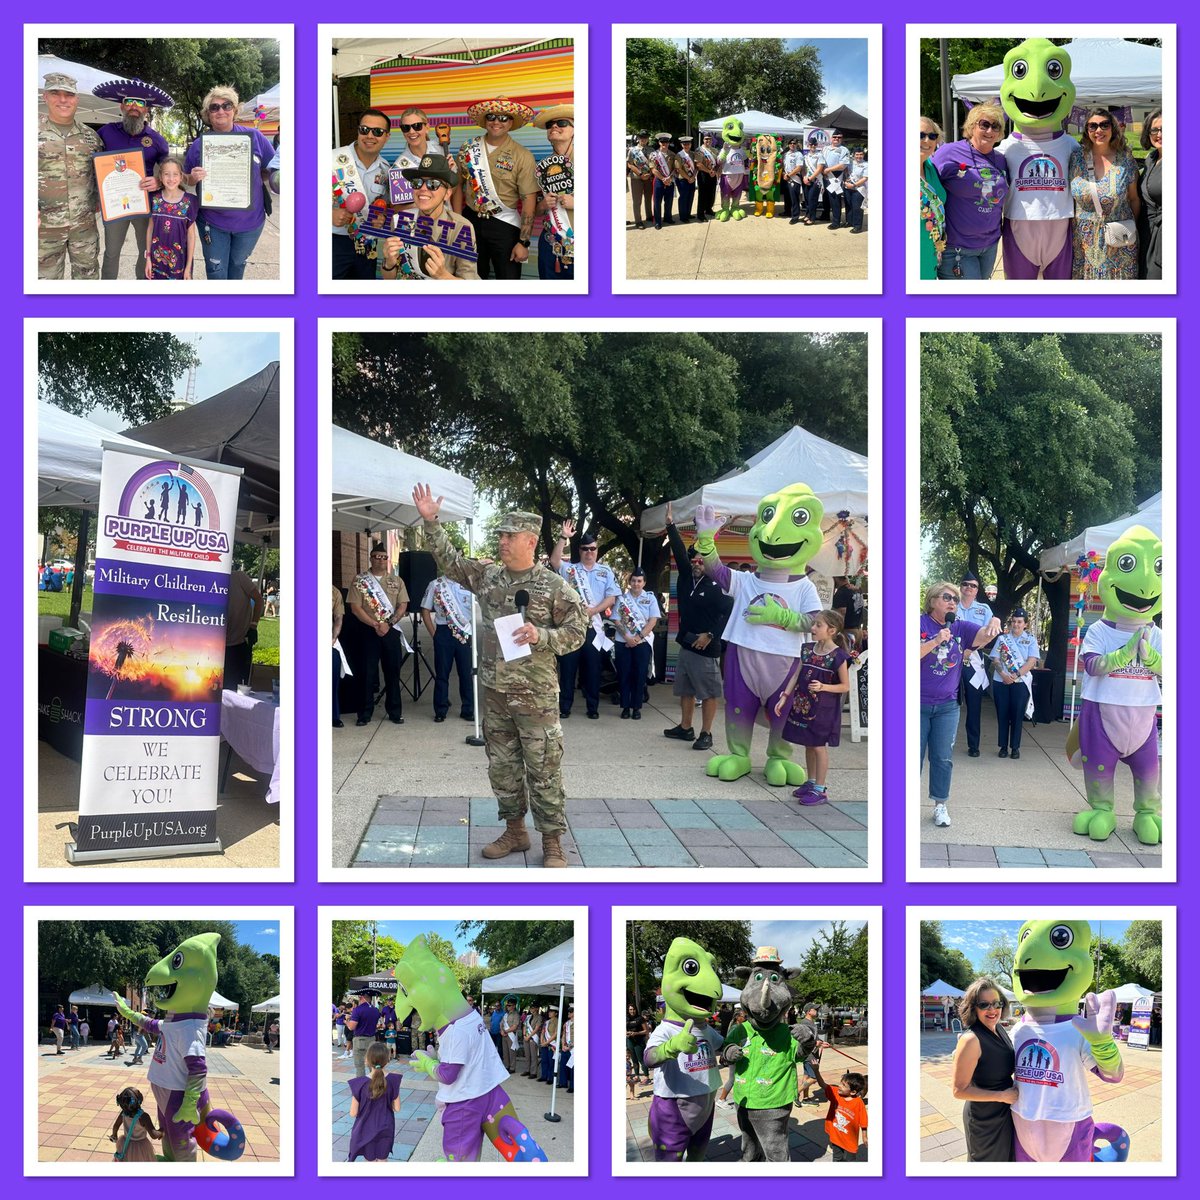 Great day celebrating the military child at the Hemisfair. Thank you to all the organizations that attended! Loved seeing so many children and military families. What a wonderful community event.